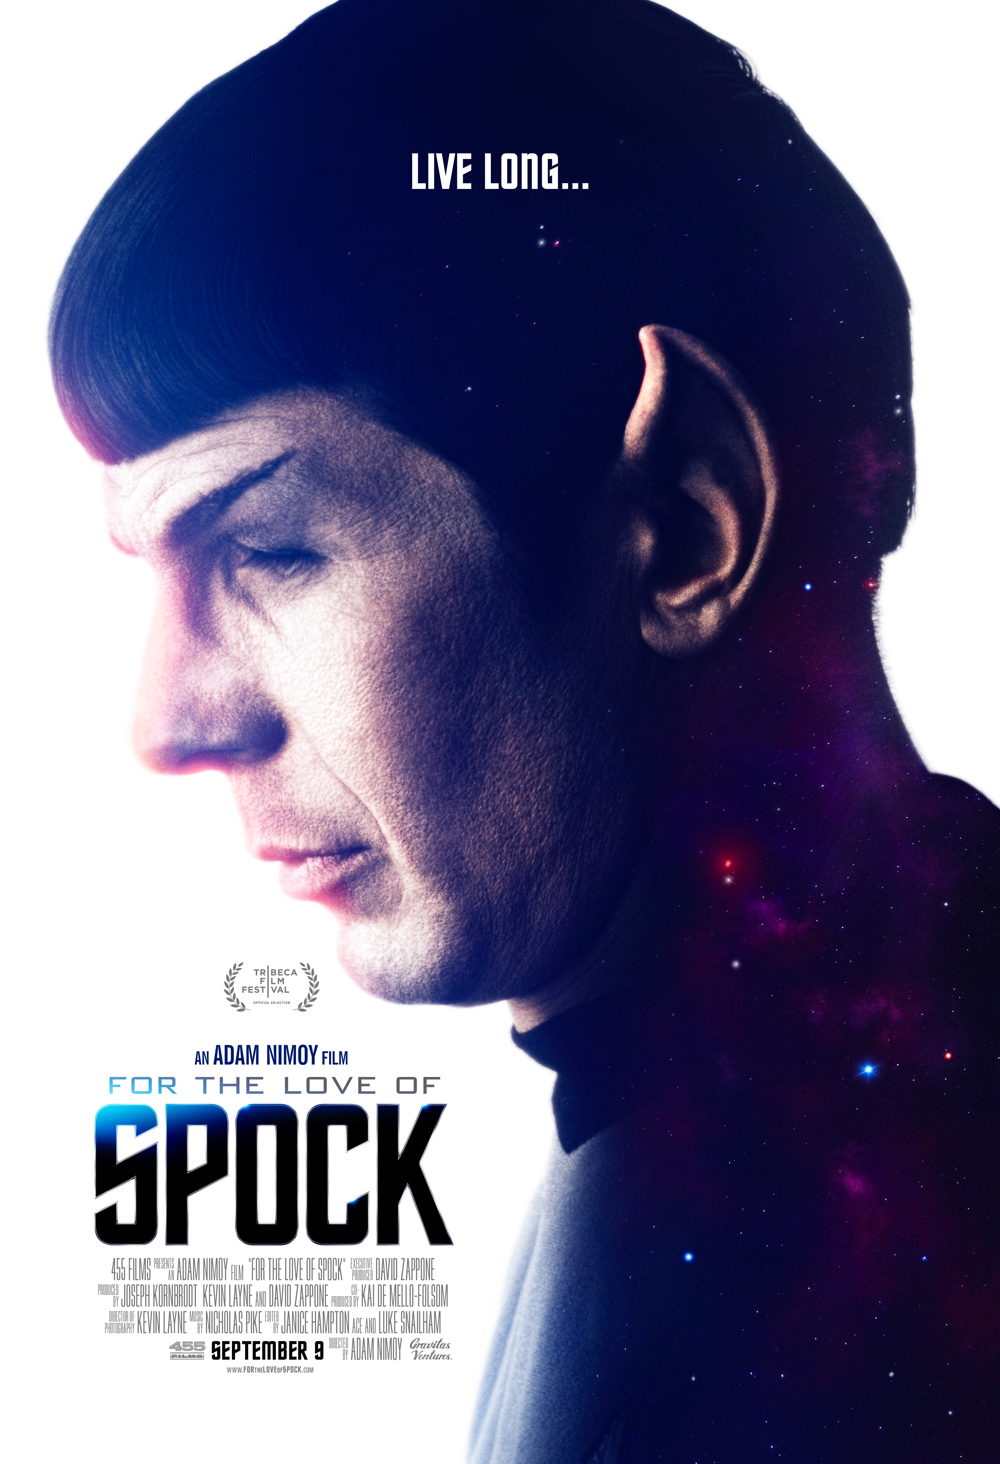 moviegoer.com: FOR THE LOVE OF SPOCK movie poster